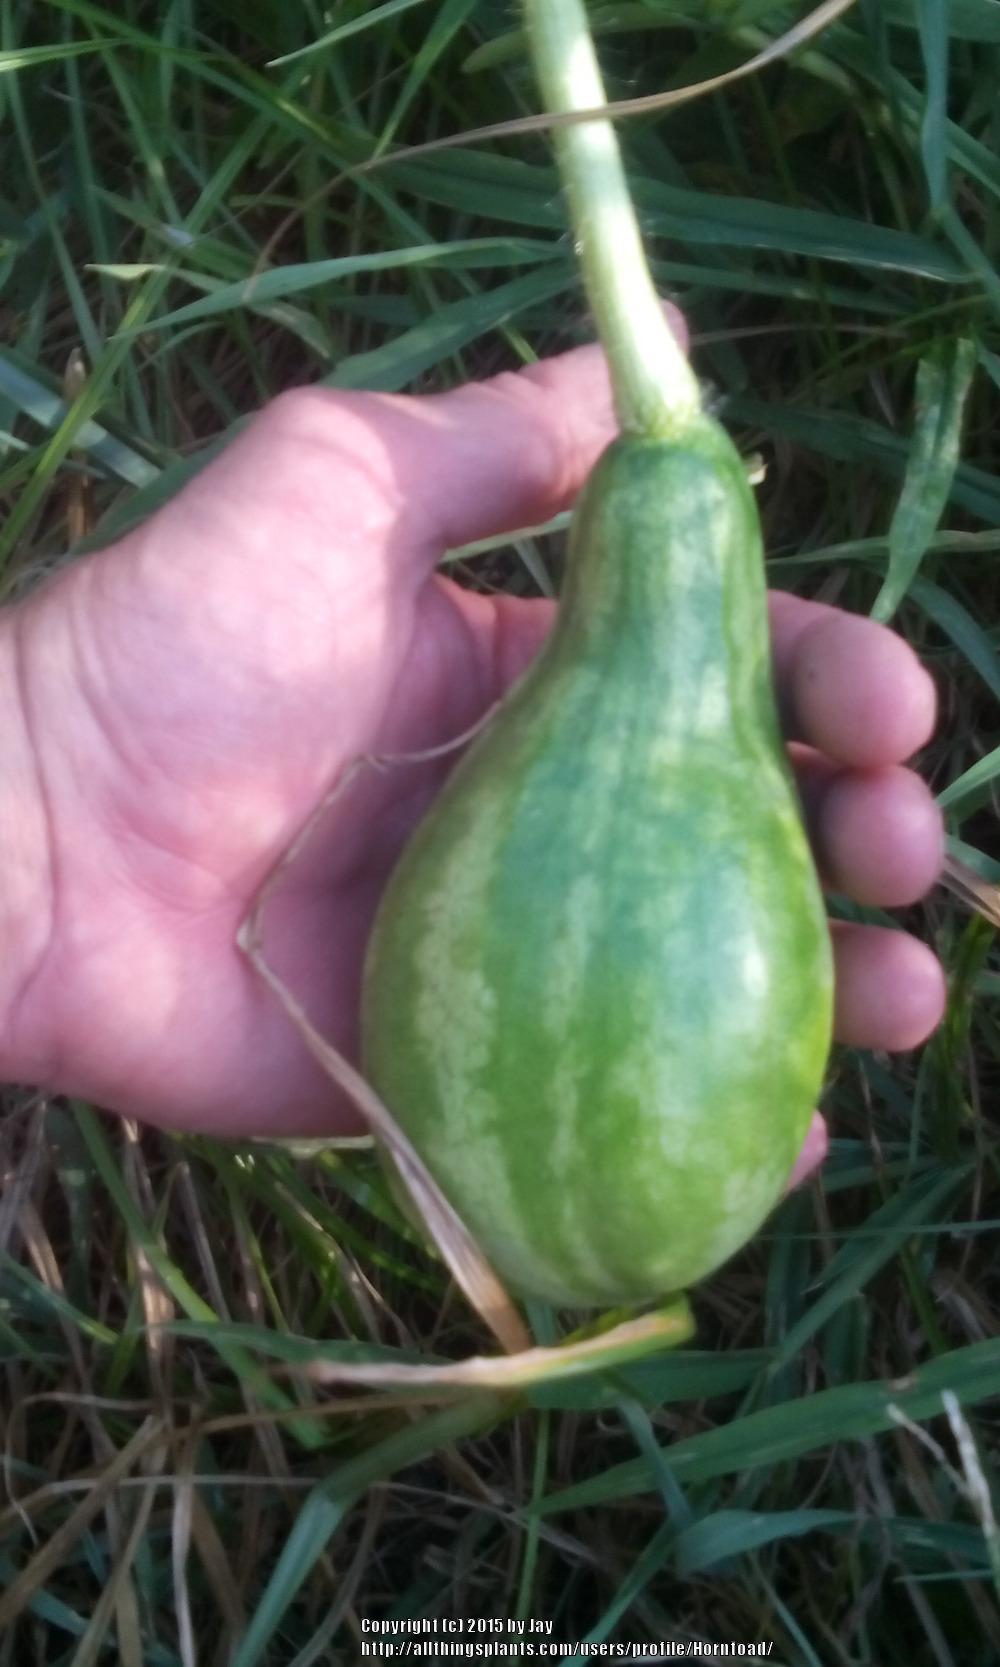 Photo of Watermelon (Citrullus lanatus 'Schochler') uploaded by Horntoad